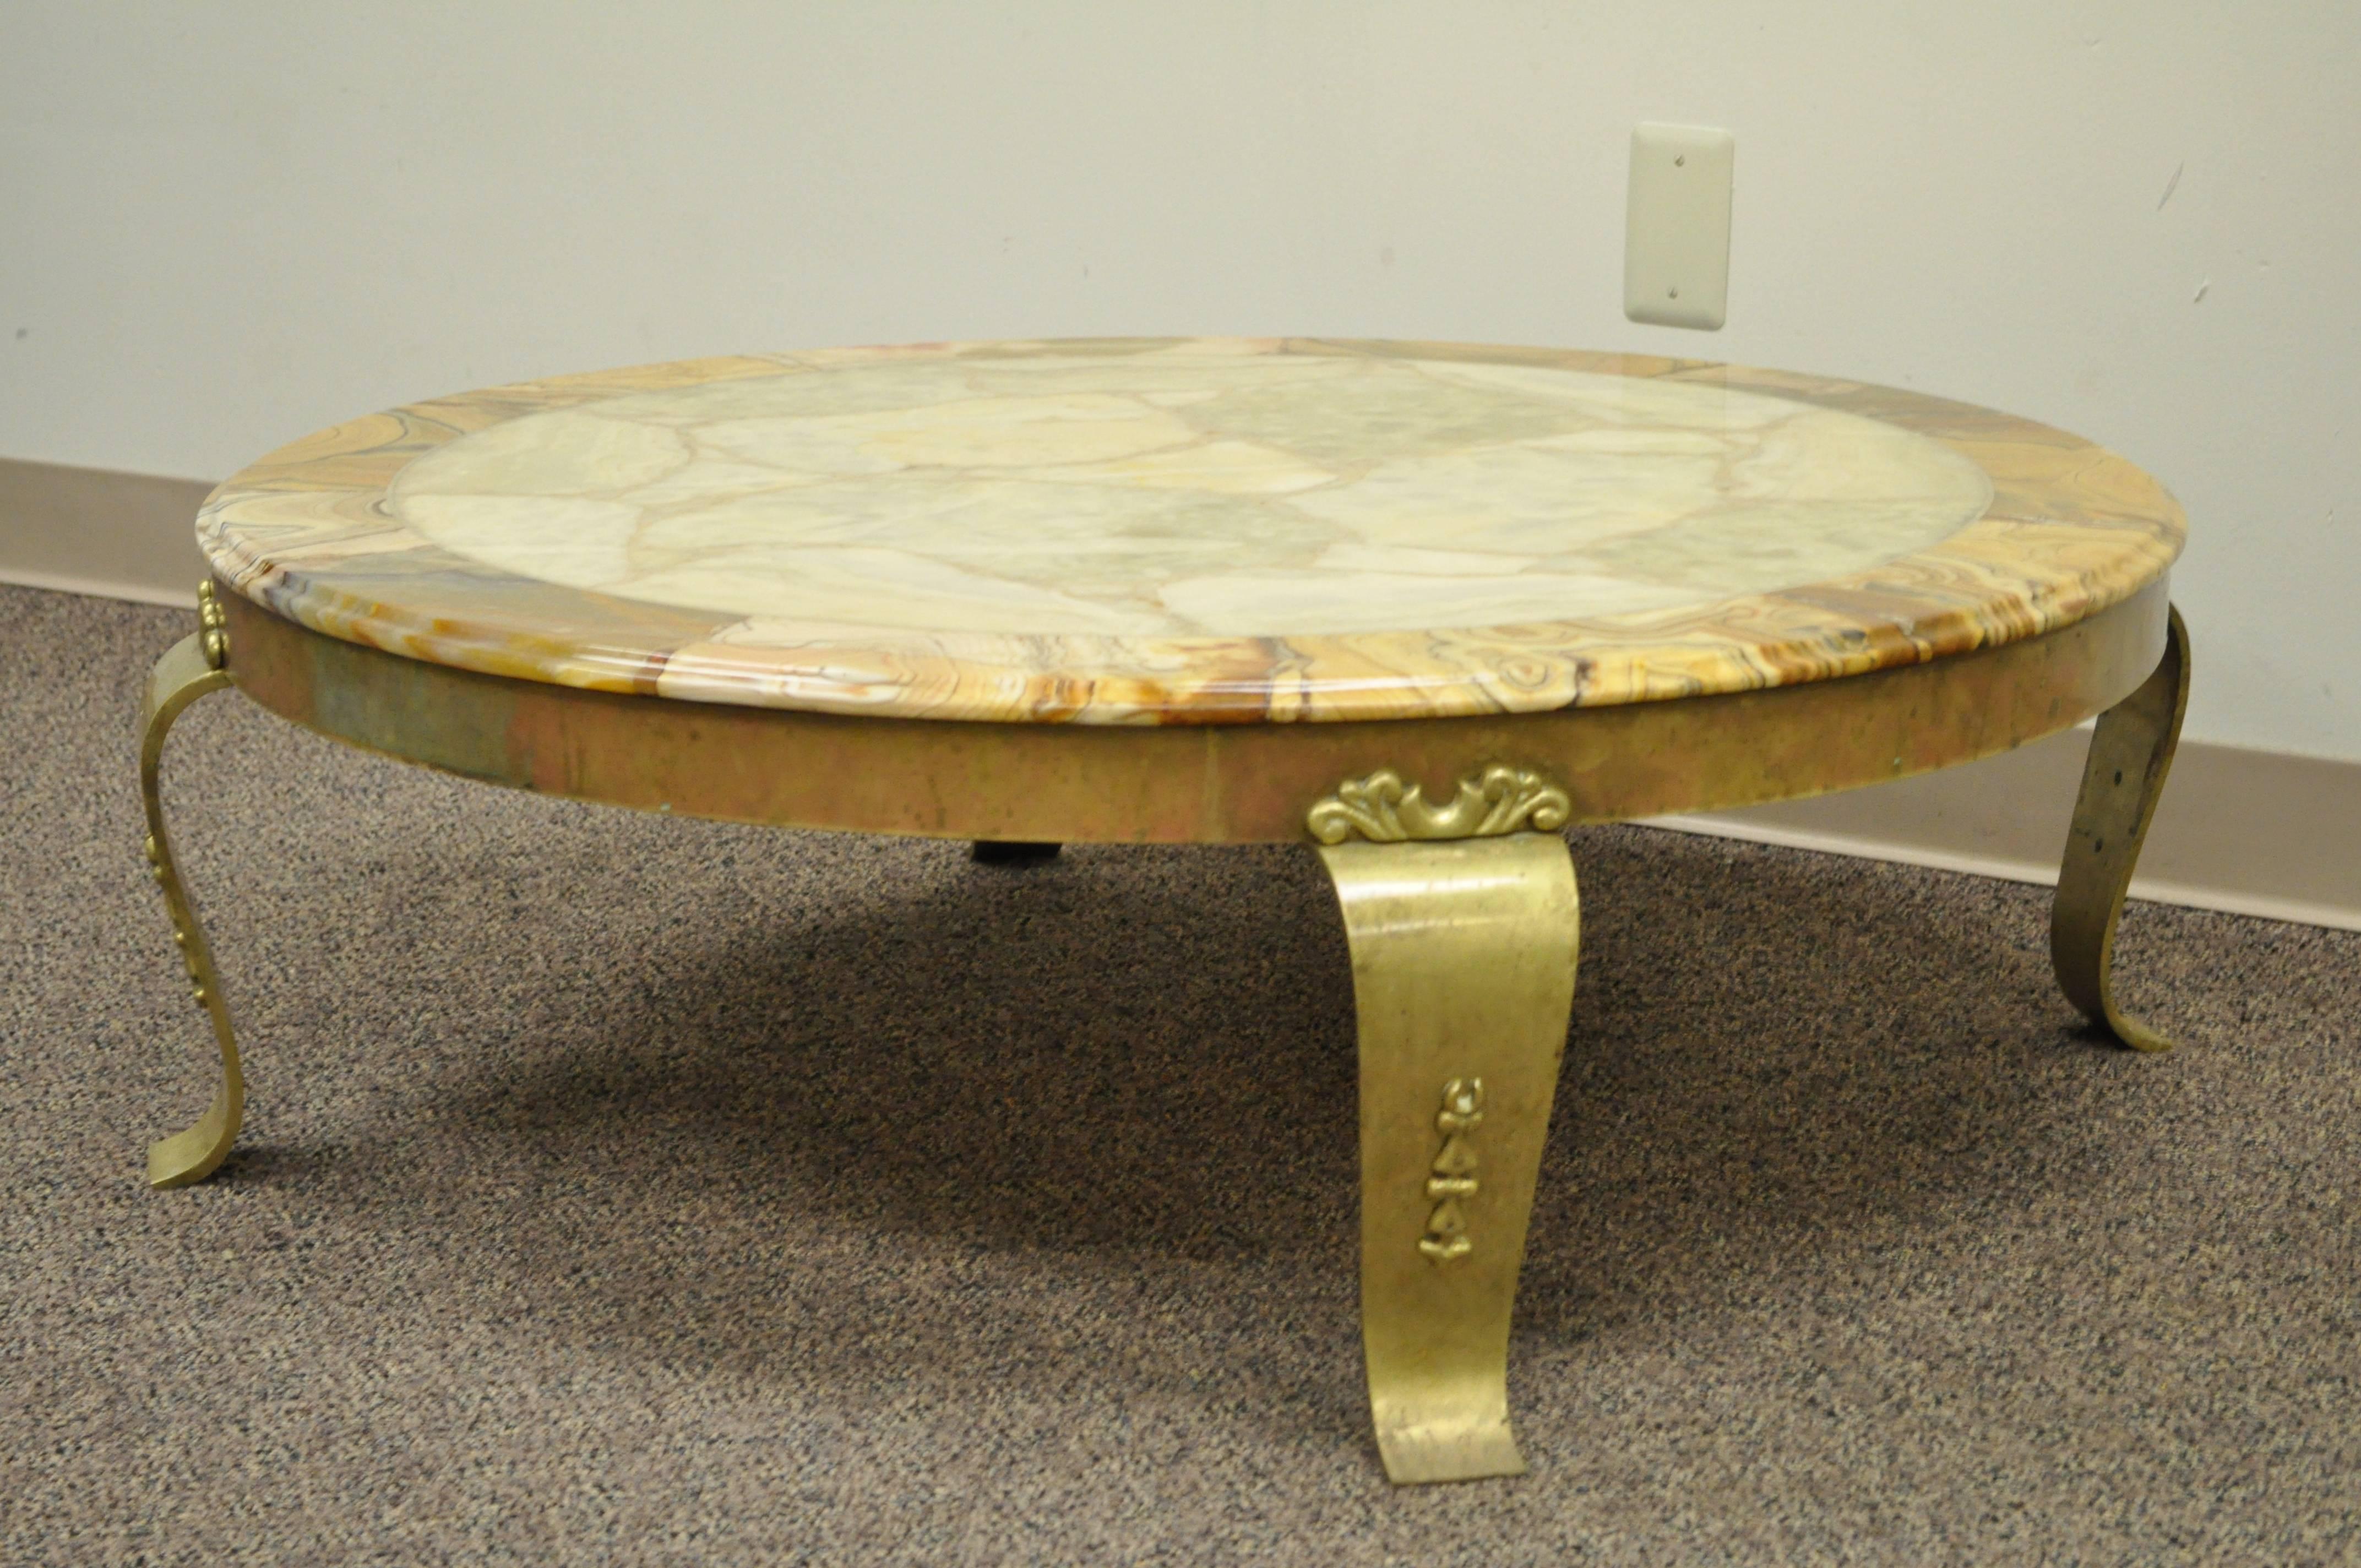 Stunning Hollywood Regency / Mid-Century Modern round coffee table by Muller. Item features a solid brass base with decorated scrolling cabriole legs and a beautiful onyx top with beveled edge. Brass is in original condition and has achieved a